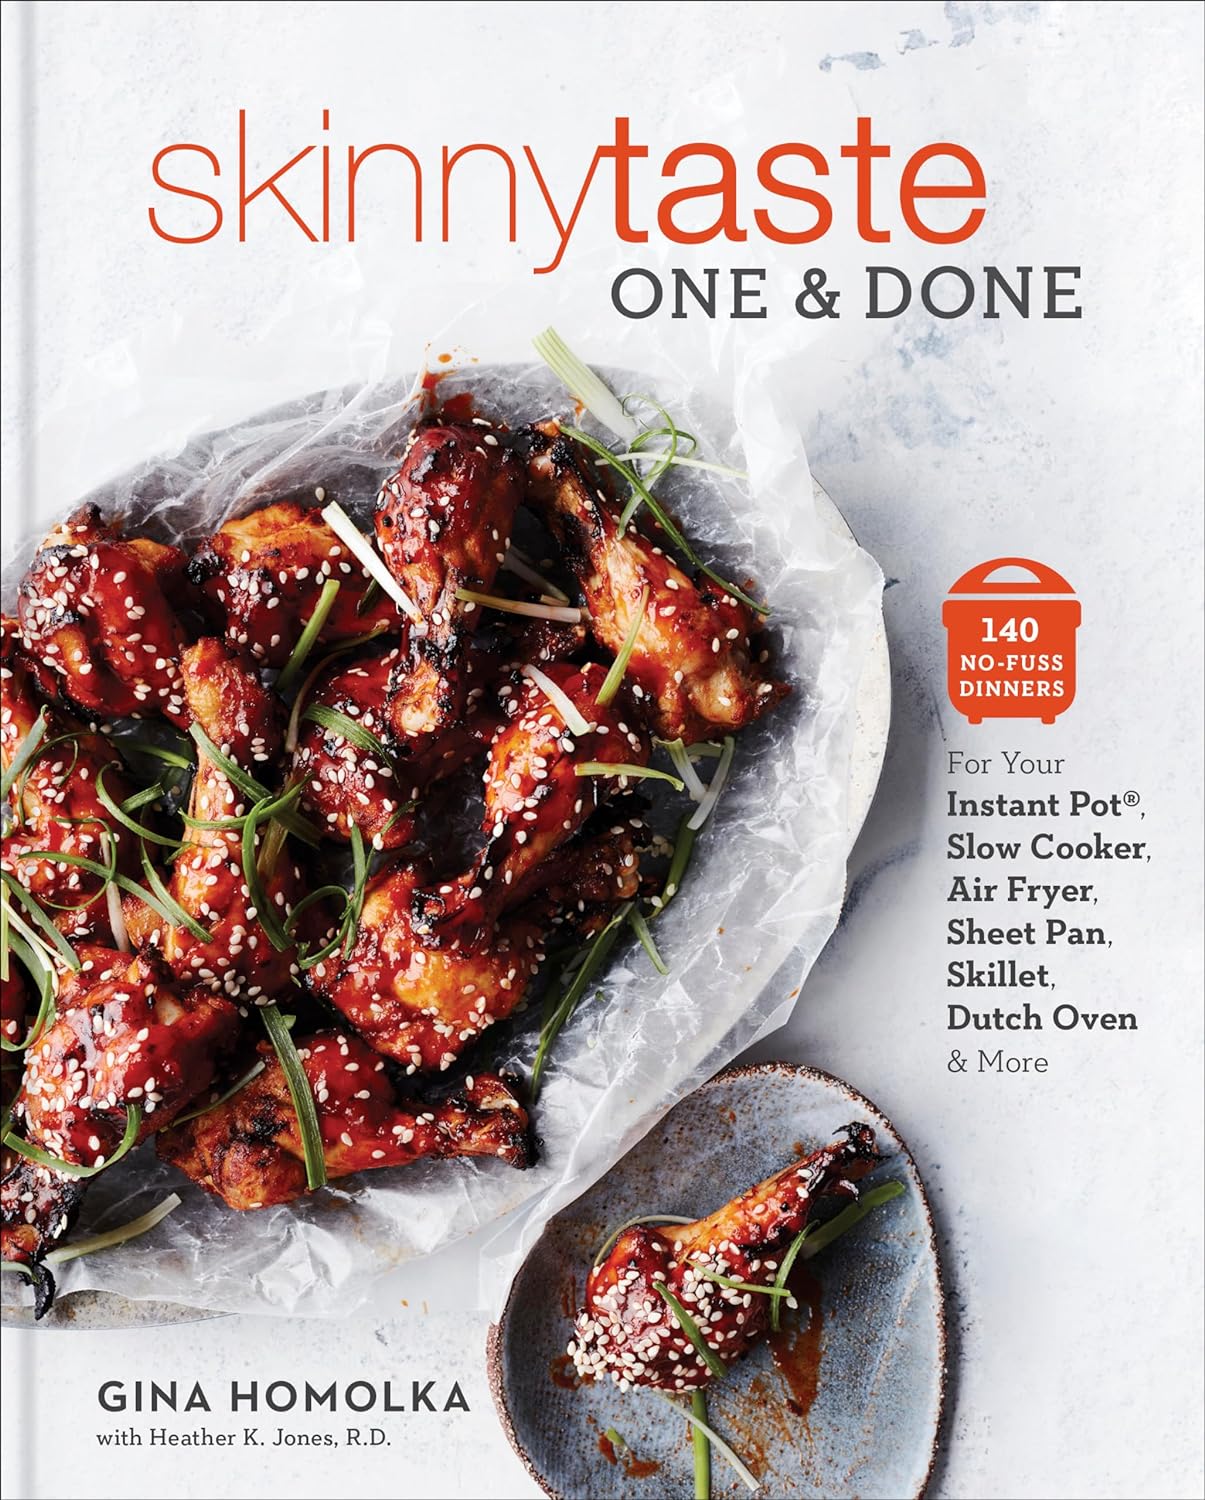 Skinnytaste One and Done: 140 No-Fuss Dinners for Your Instant Pot®, Slow Cooker, Air Fryer, Sheet Pan, Skillet, Dutch Oven, and More (Gina Homolka, Heather K. Jones R.D.)